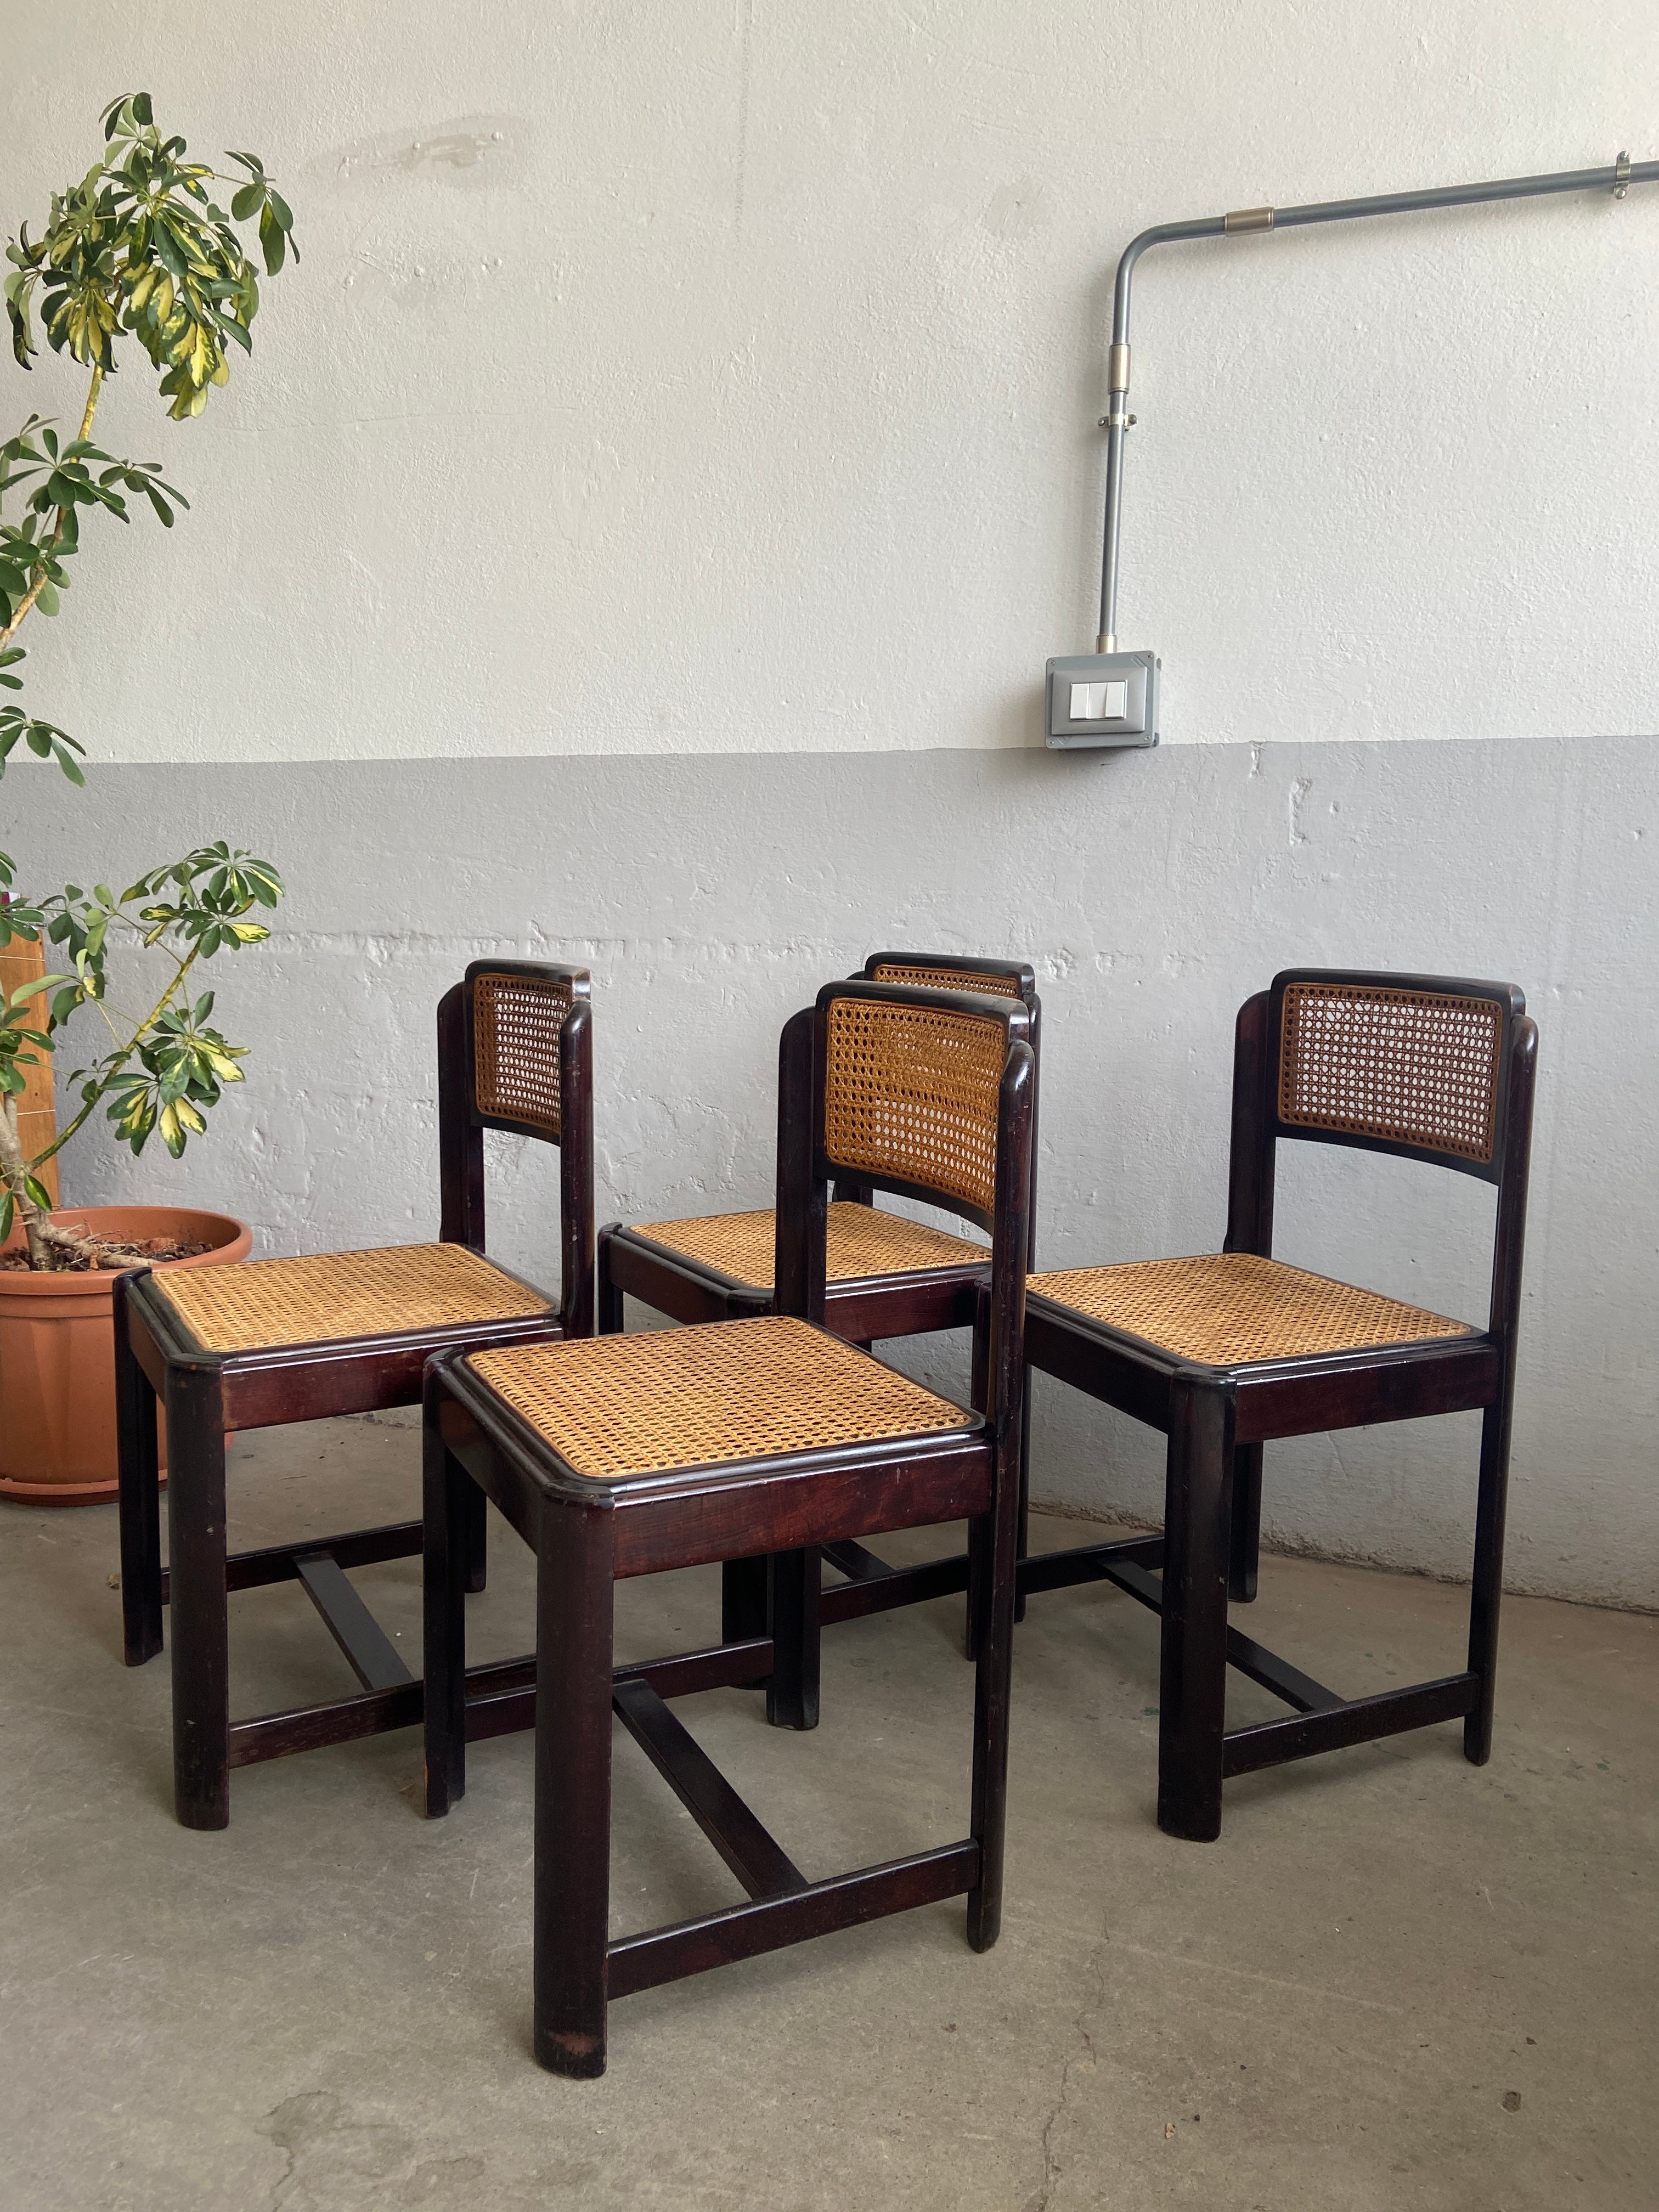 Mid-Century Modern Italian Set of 4 Mahogany dining Chairs with Vienna Straw in the style of Carlo Bartoli.
The chairs are in really good vintage conditions. Wear consistent with age and use.
All the seats have been replaced with with high level